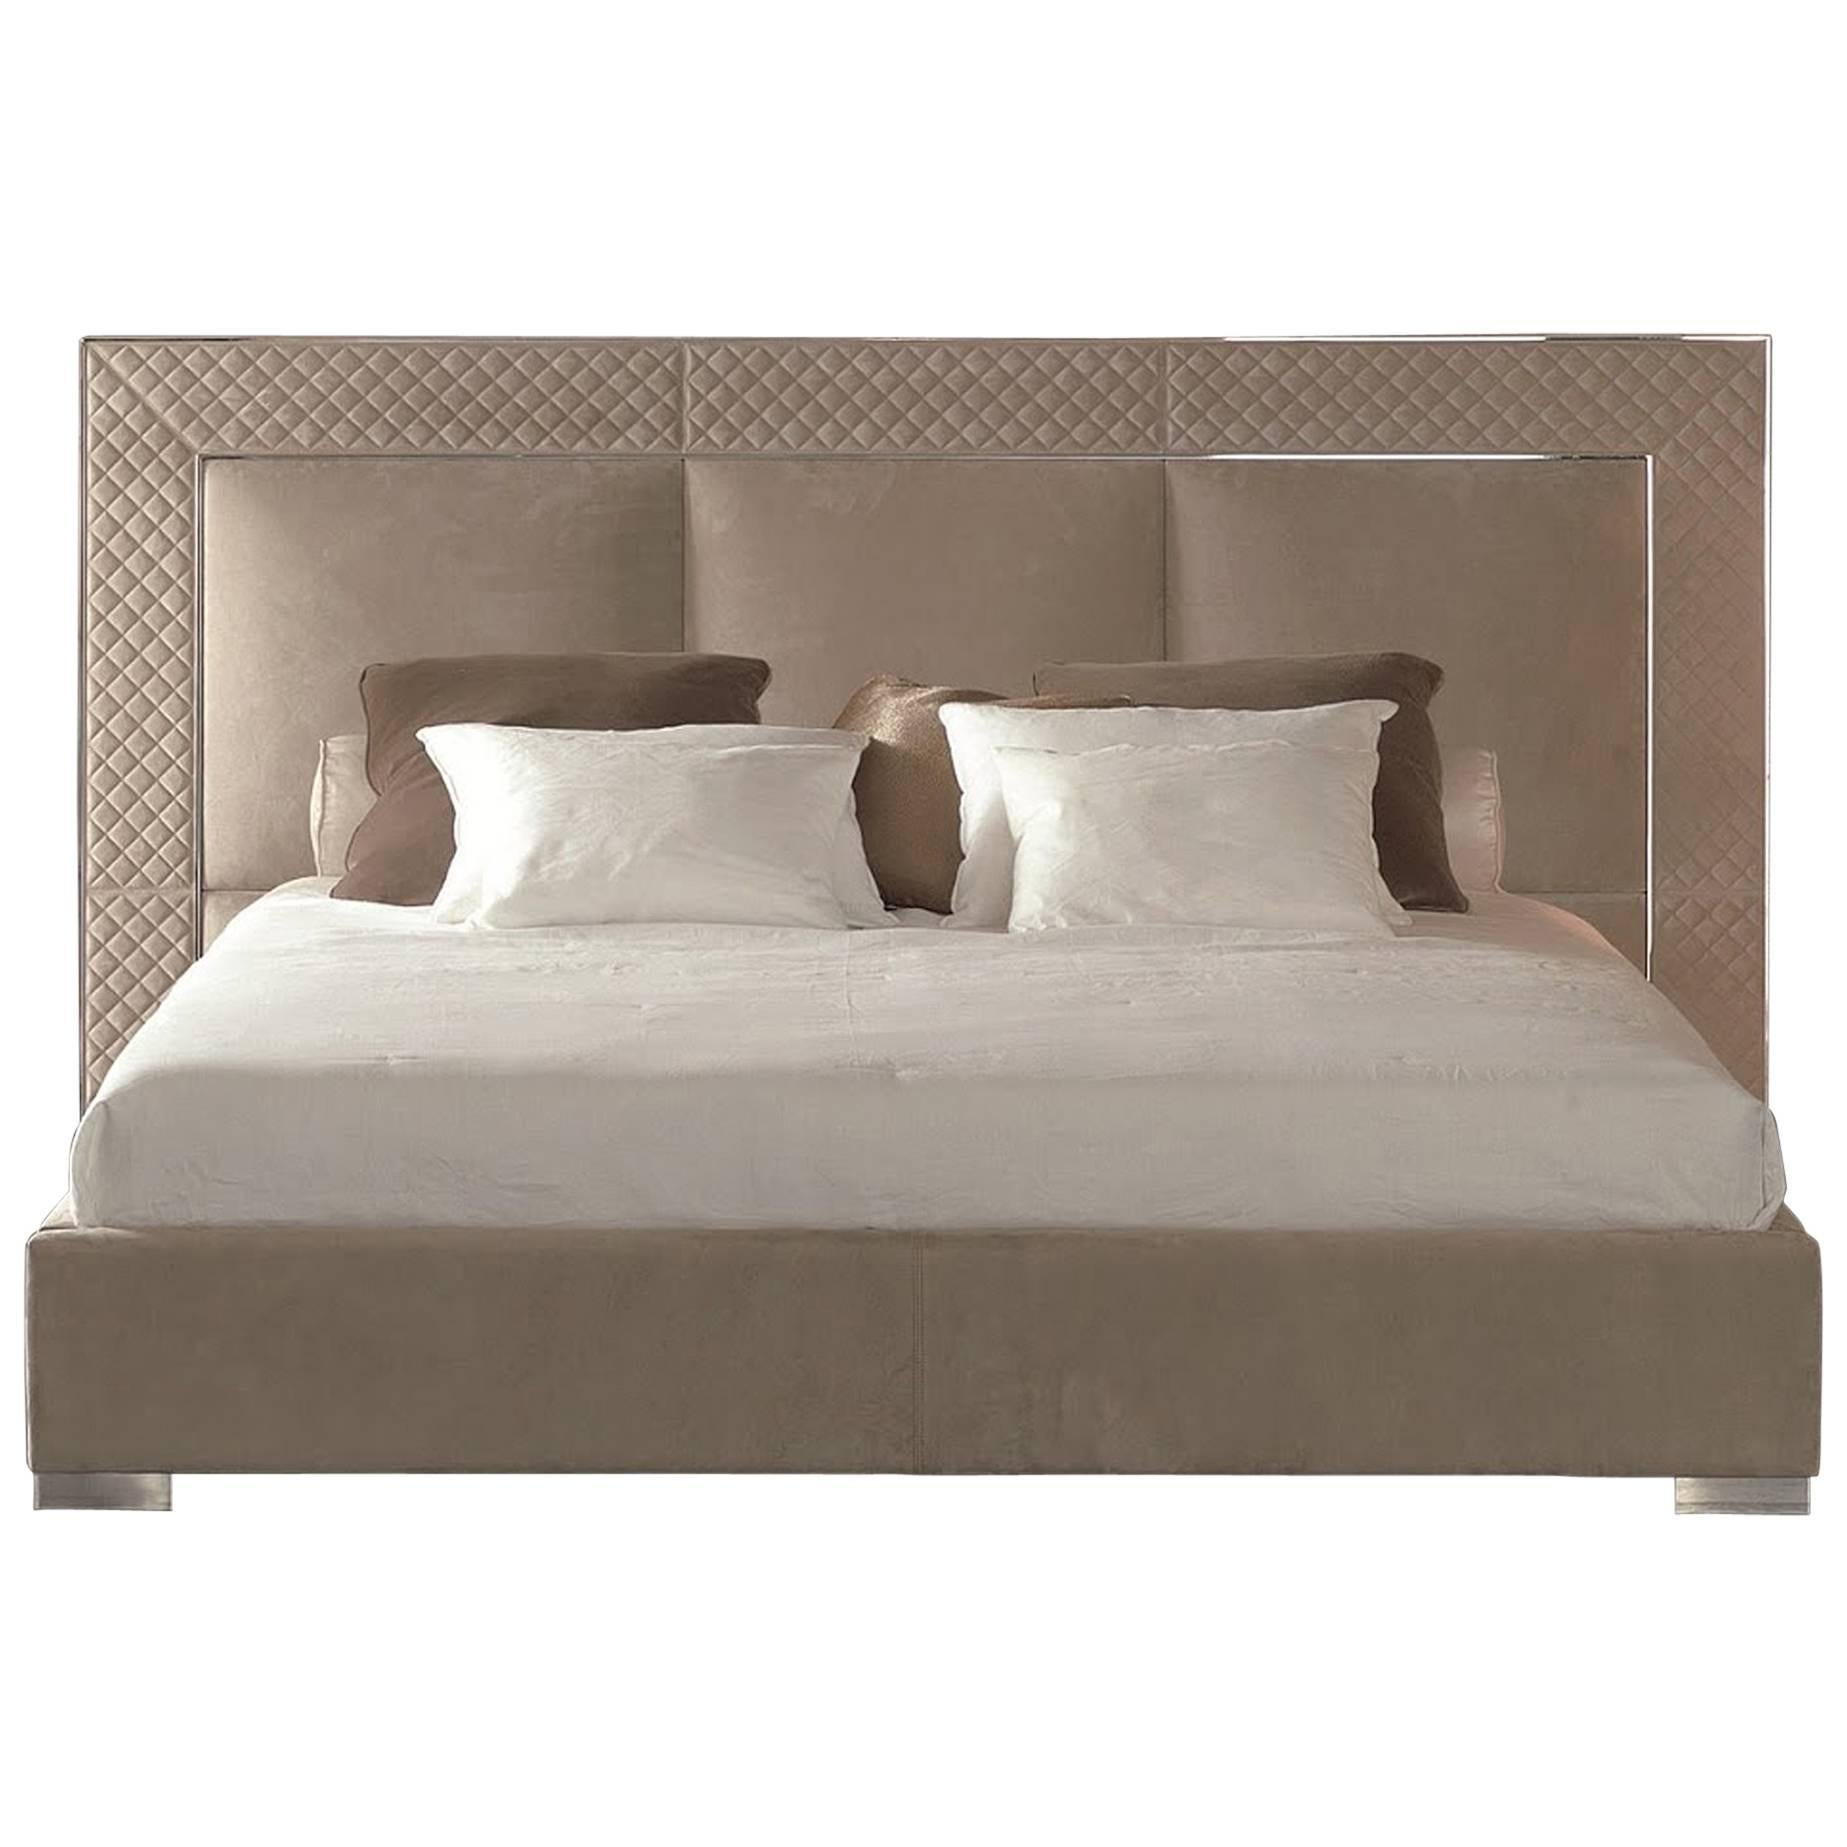 Sigma Bed with Low Headboard, Leather Upholstery Bronze or Steel Frame For Sale